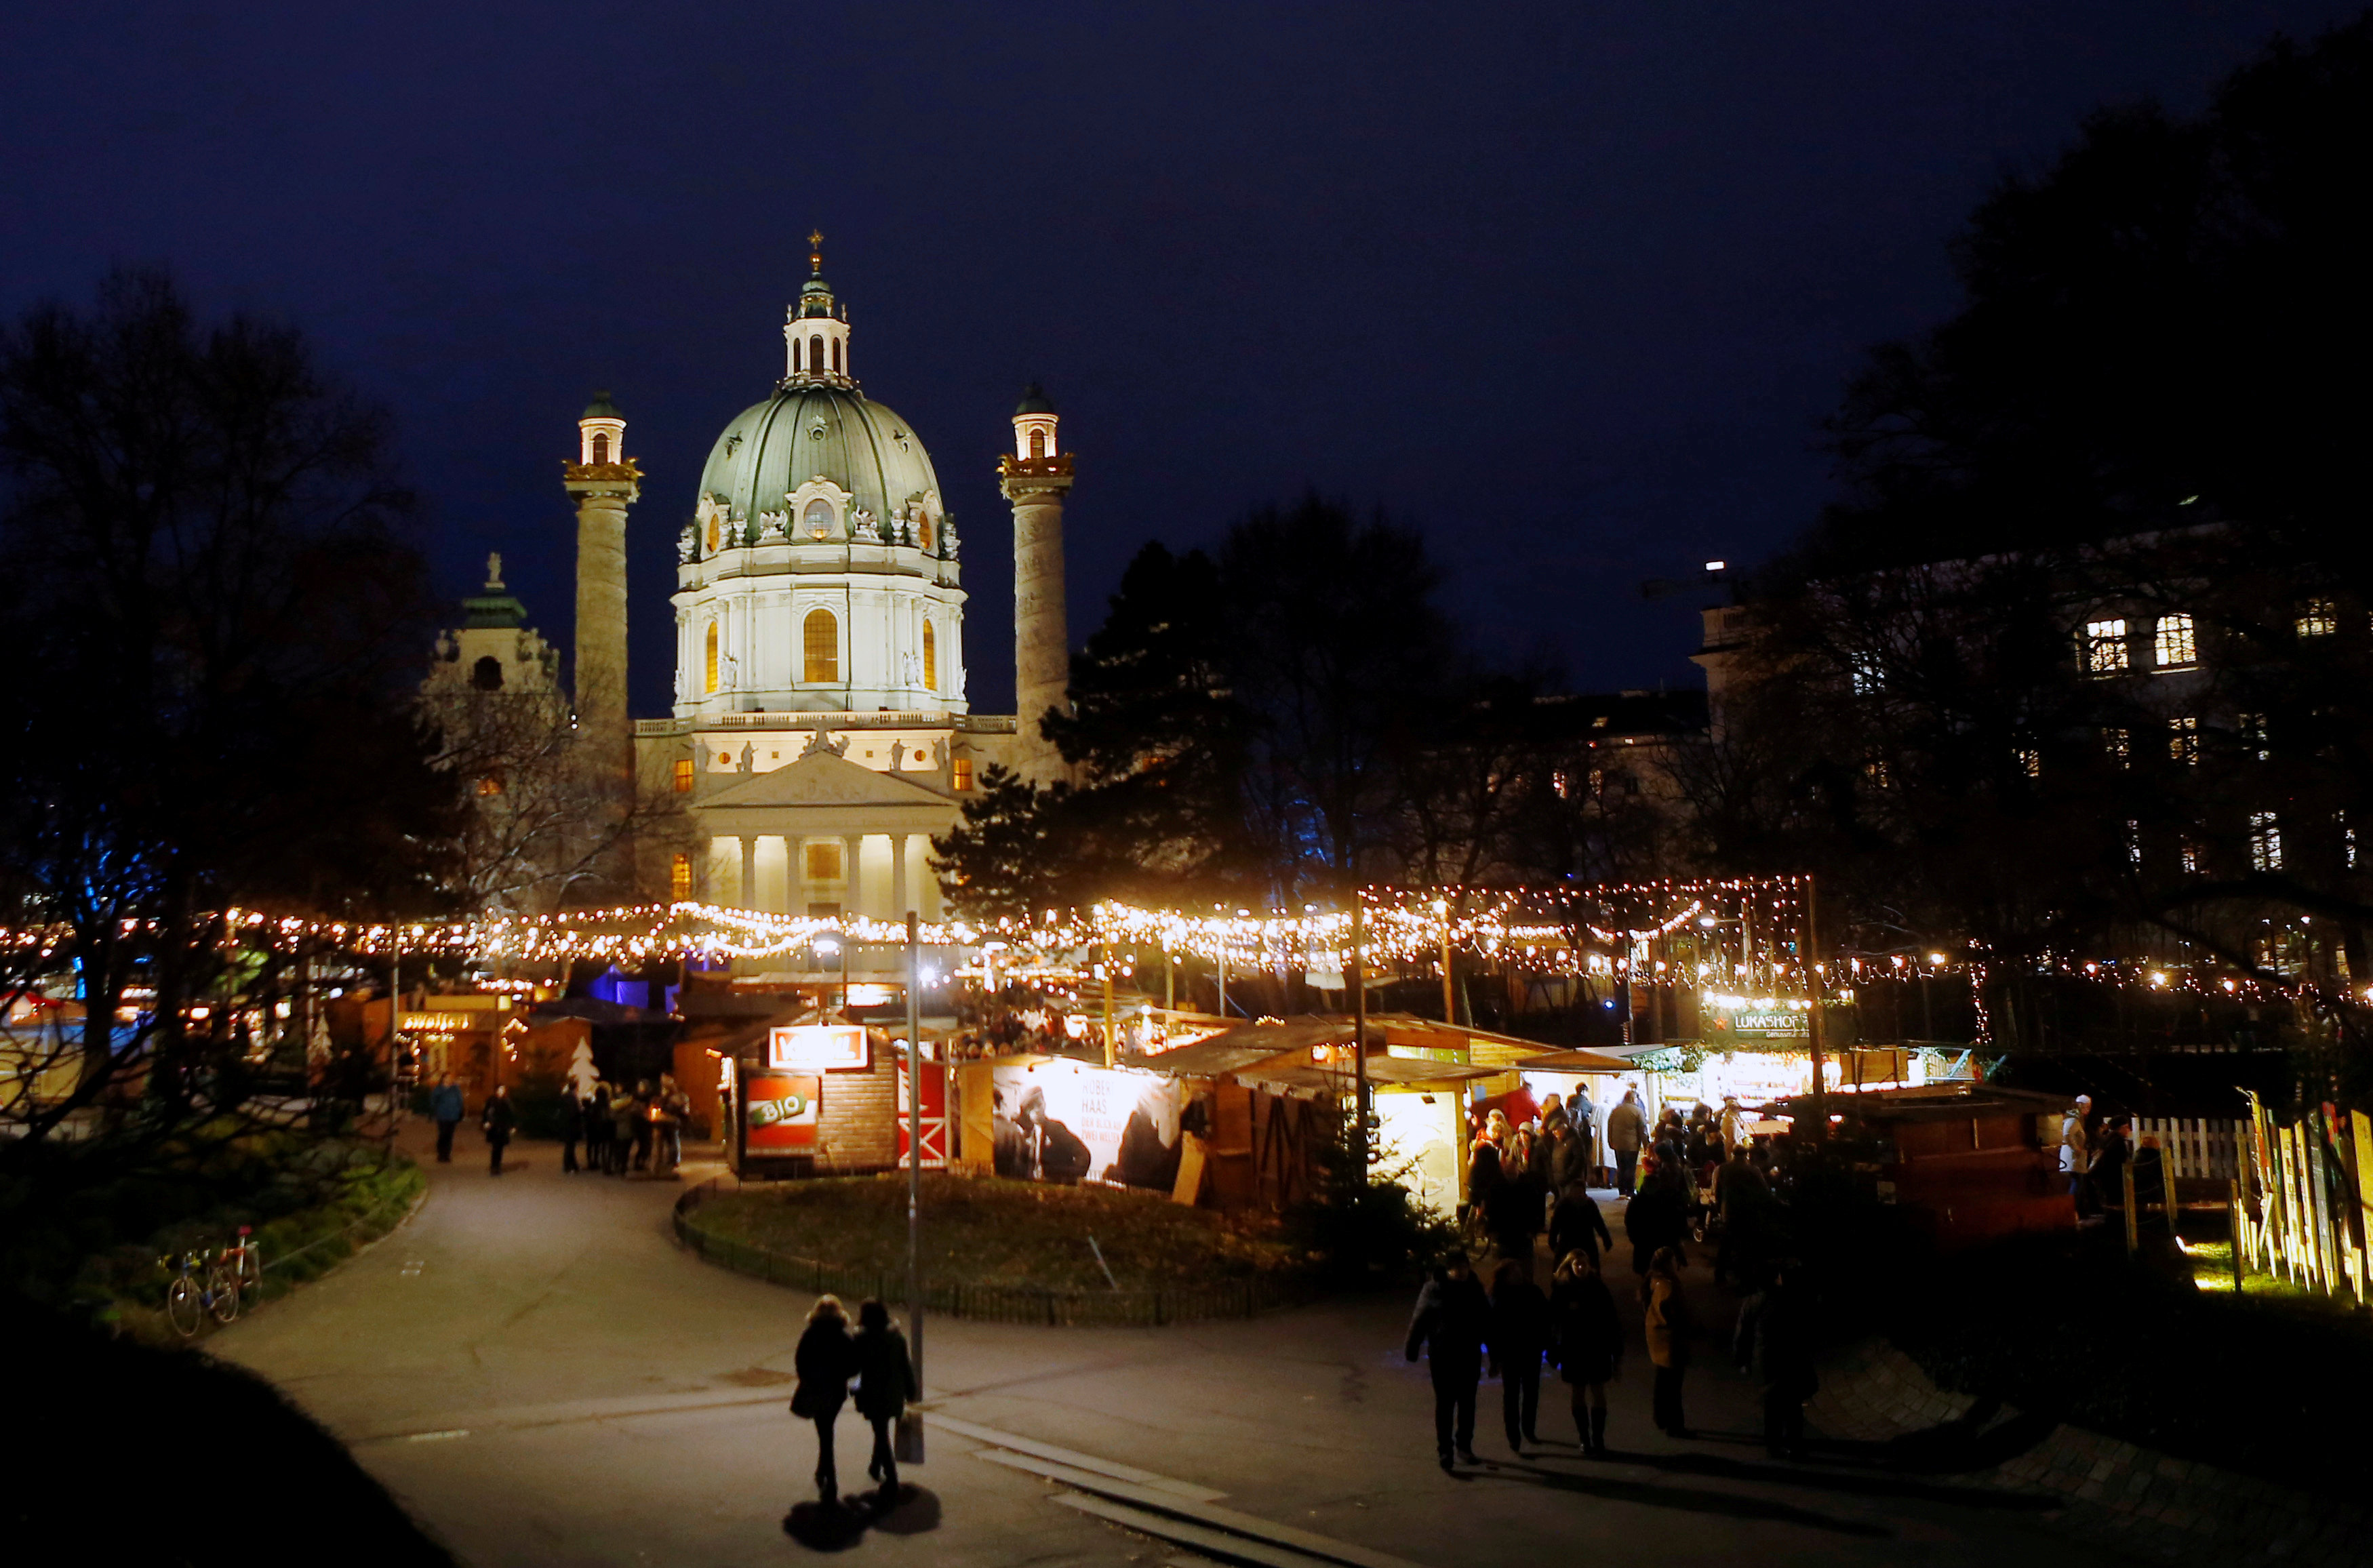 FILE PHOTO: An advent market is seen in front of Karlskirche church in Vienna, Austria, December 15, 2016. REUTERS/Heinz-Peter Bader/File Photo